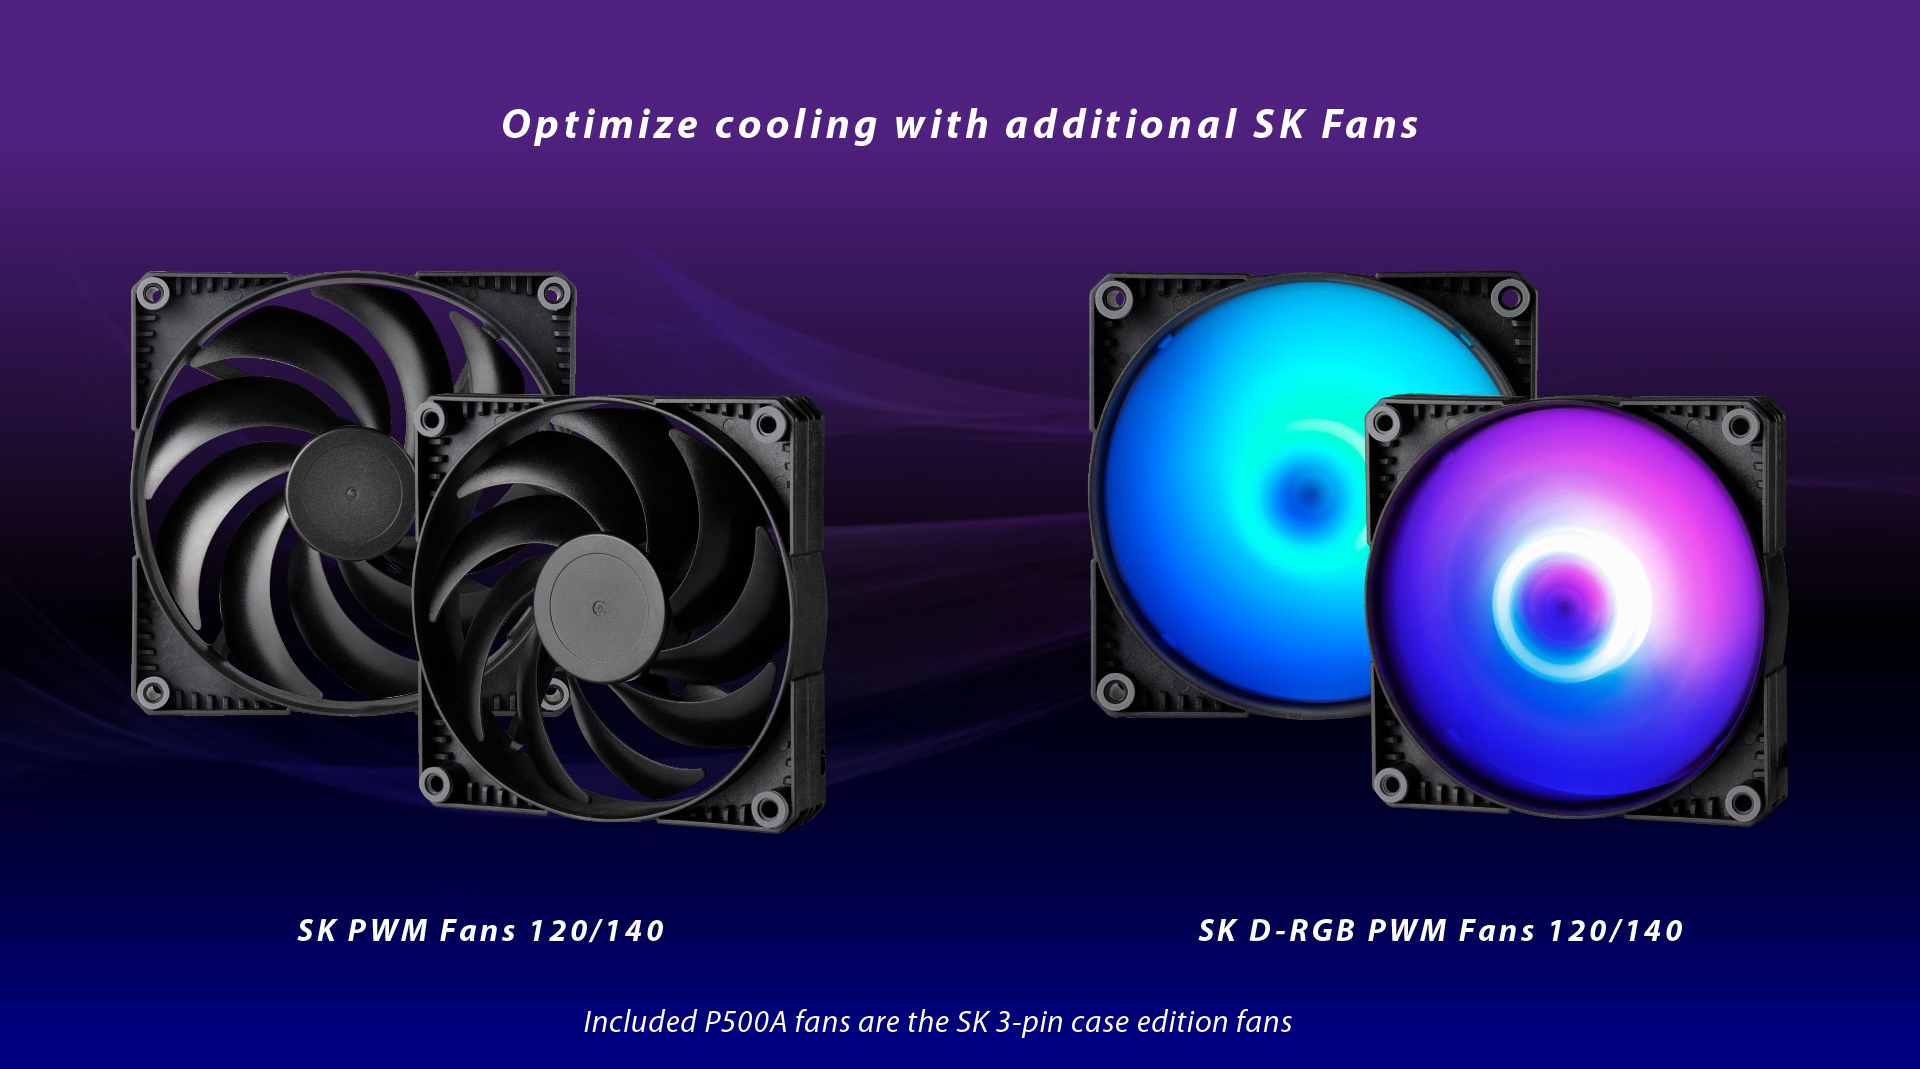 Optimize cooling with additional SK Fans